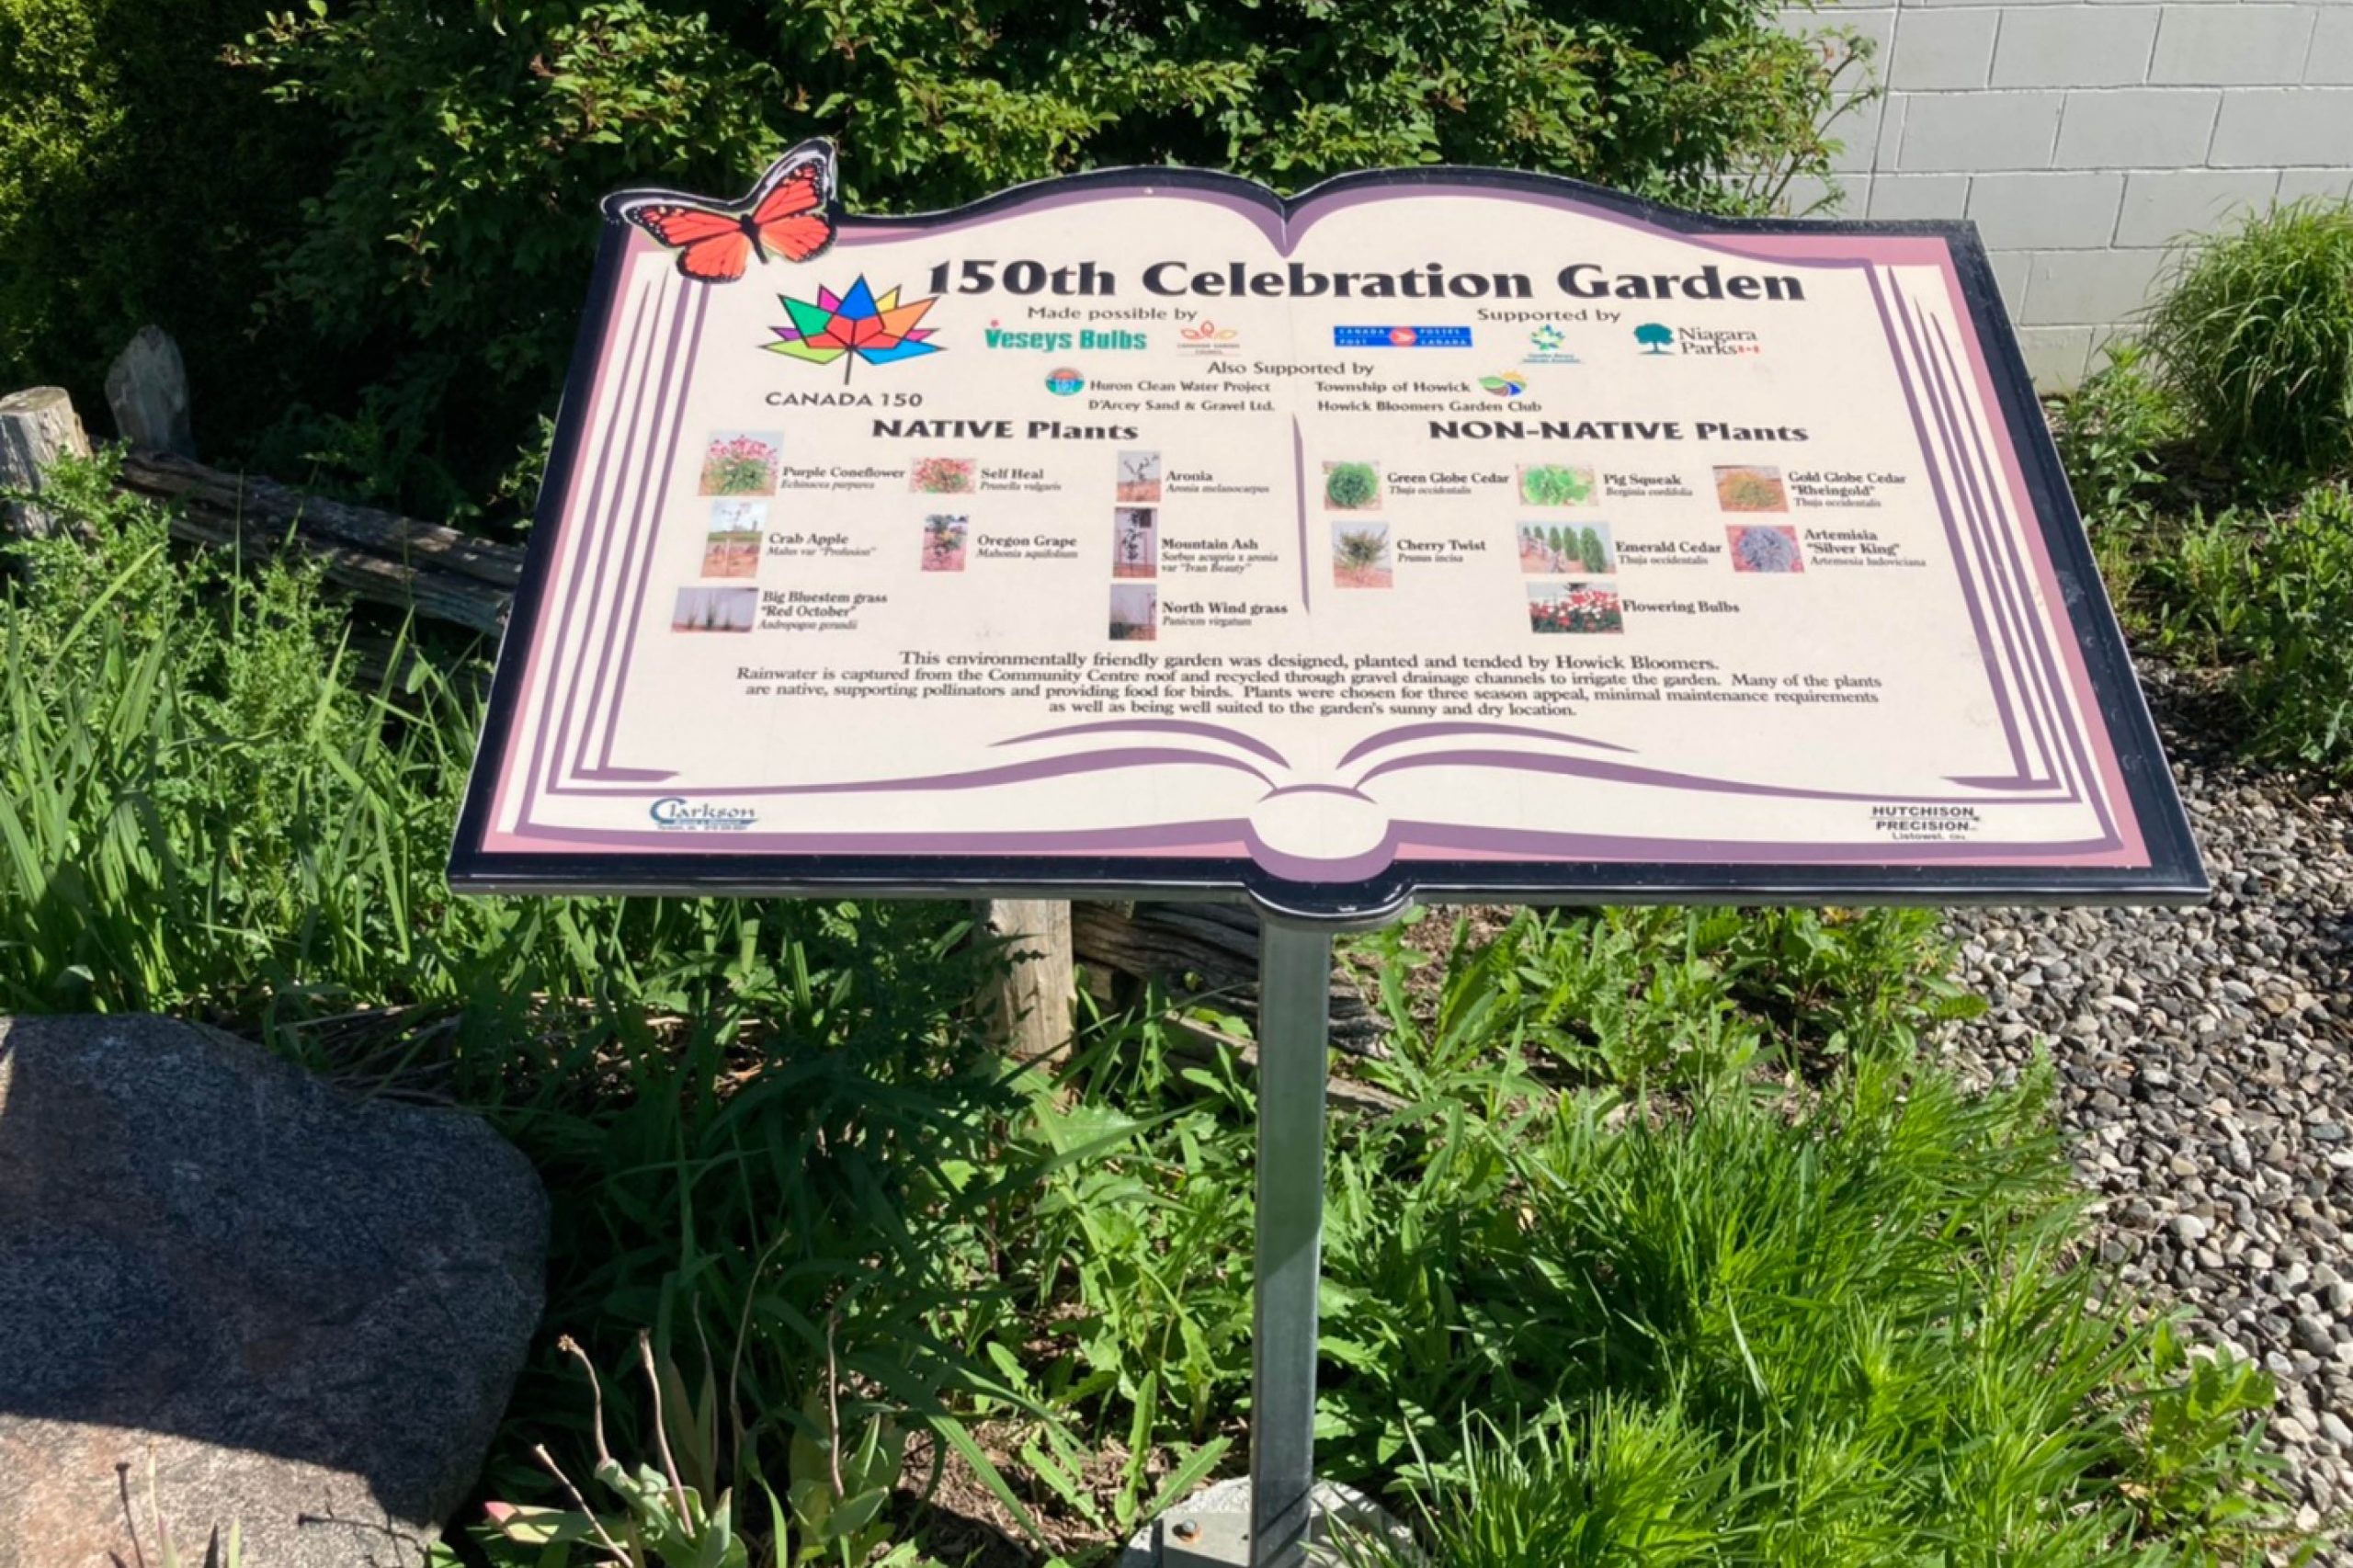 Photo of sign at 150th Celebration Garden in Howick